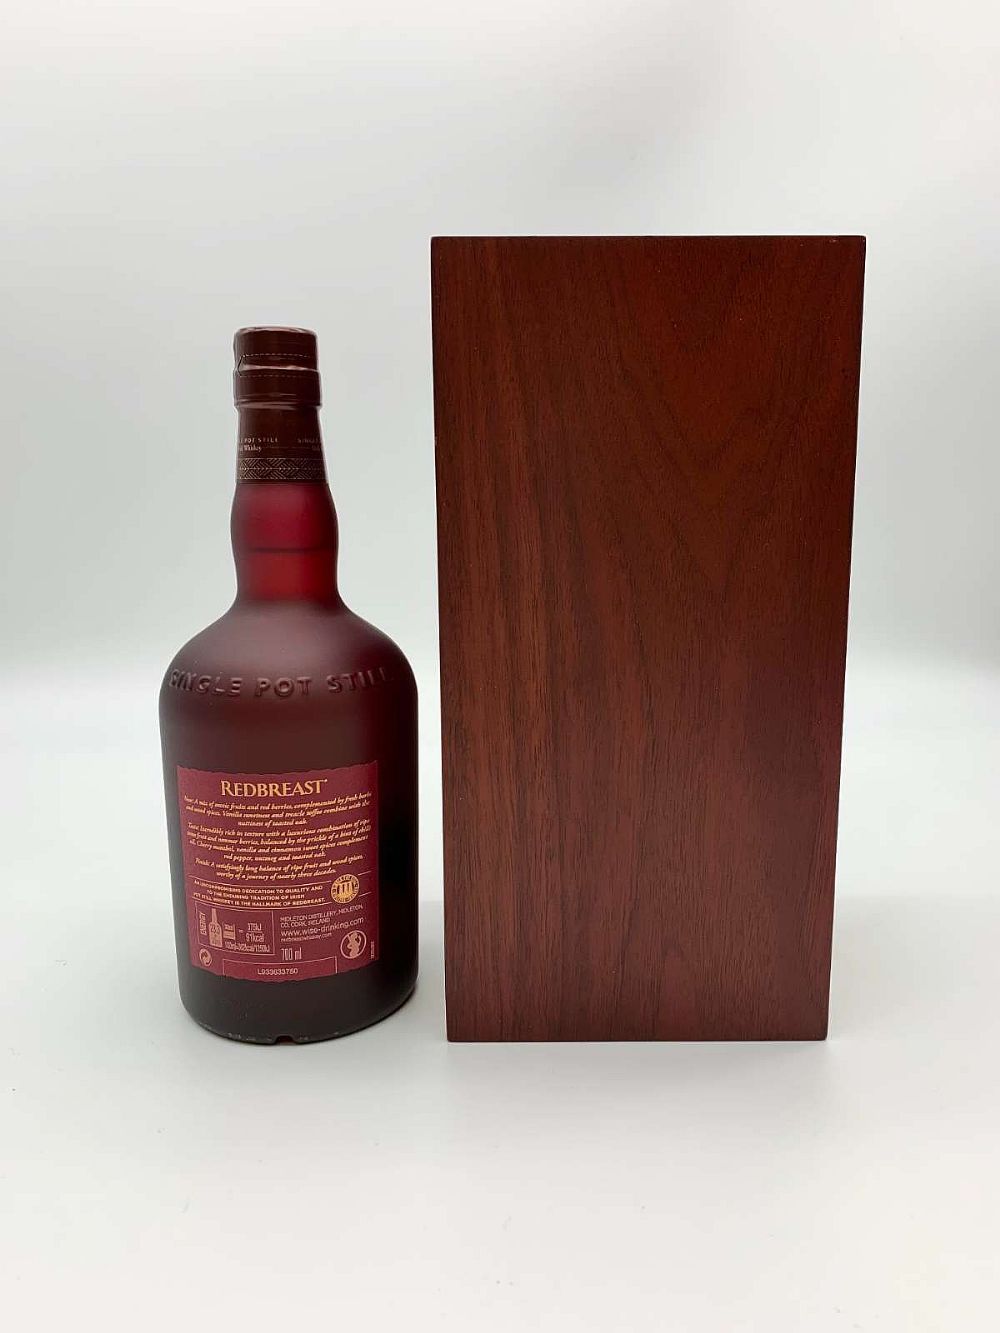 Redbreast 27 year old